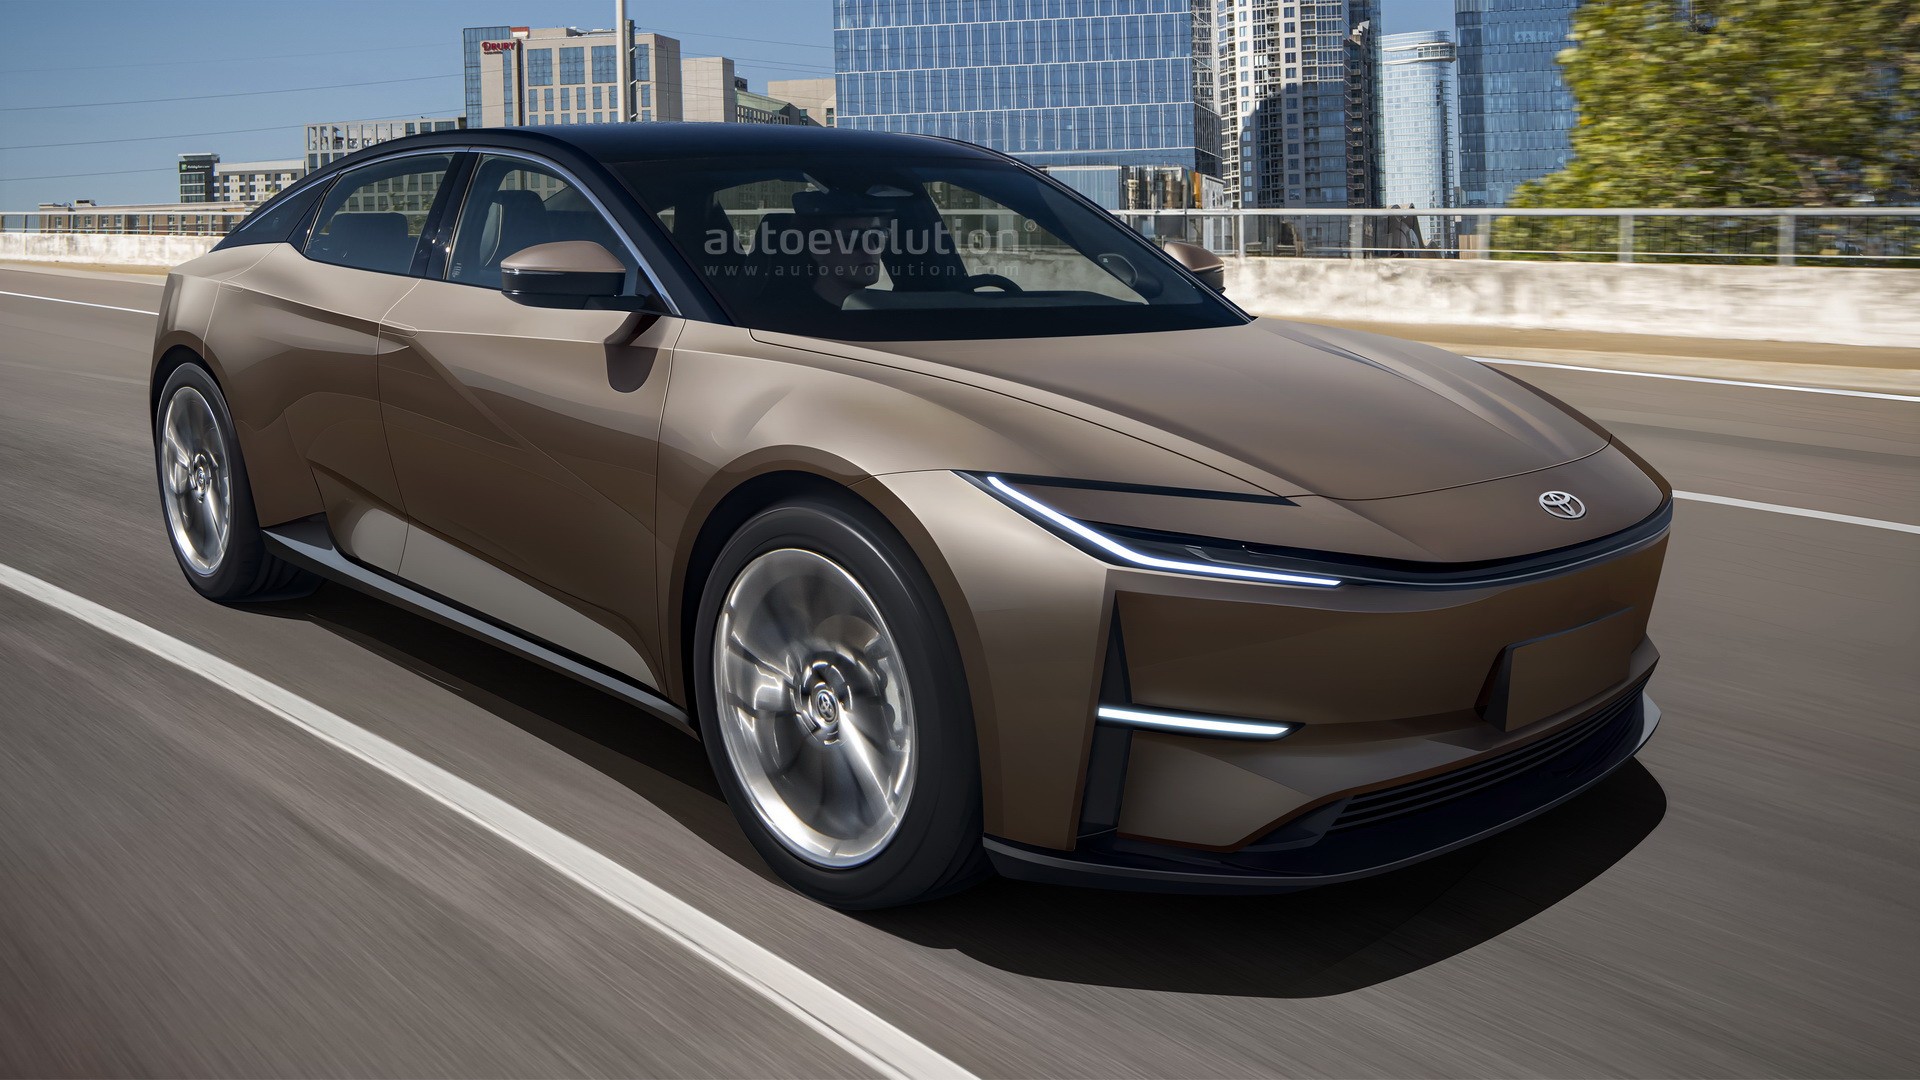 next-gen-2030-toyota-camry-ev-takes-the-fight-to-tesla-check-out-our-exclusive-design-5.jpg